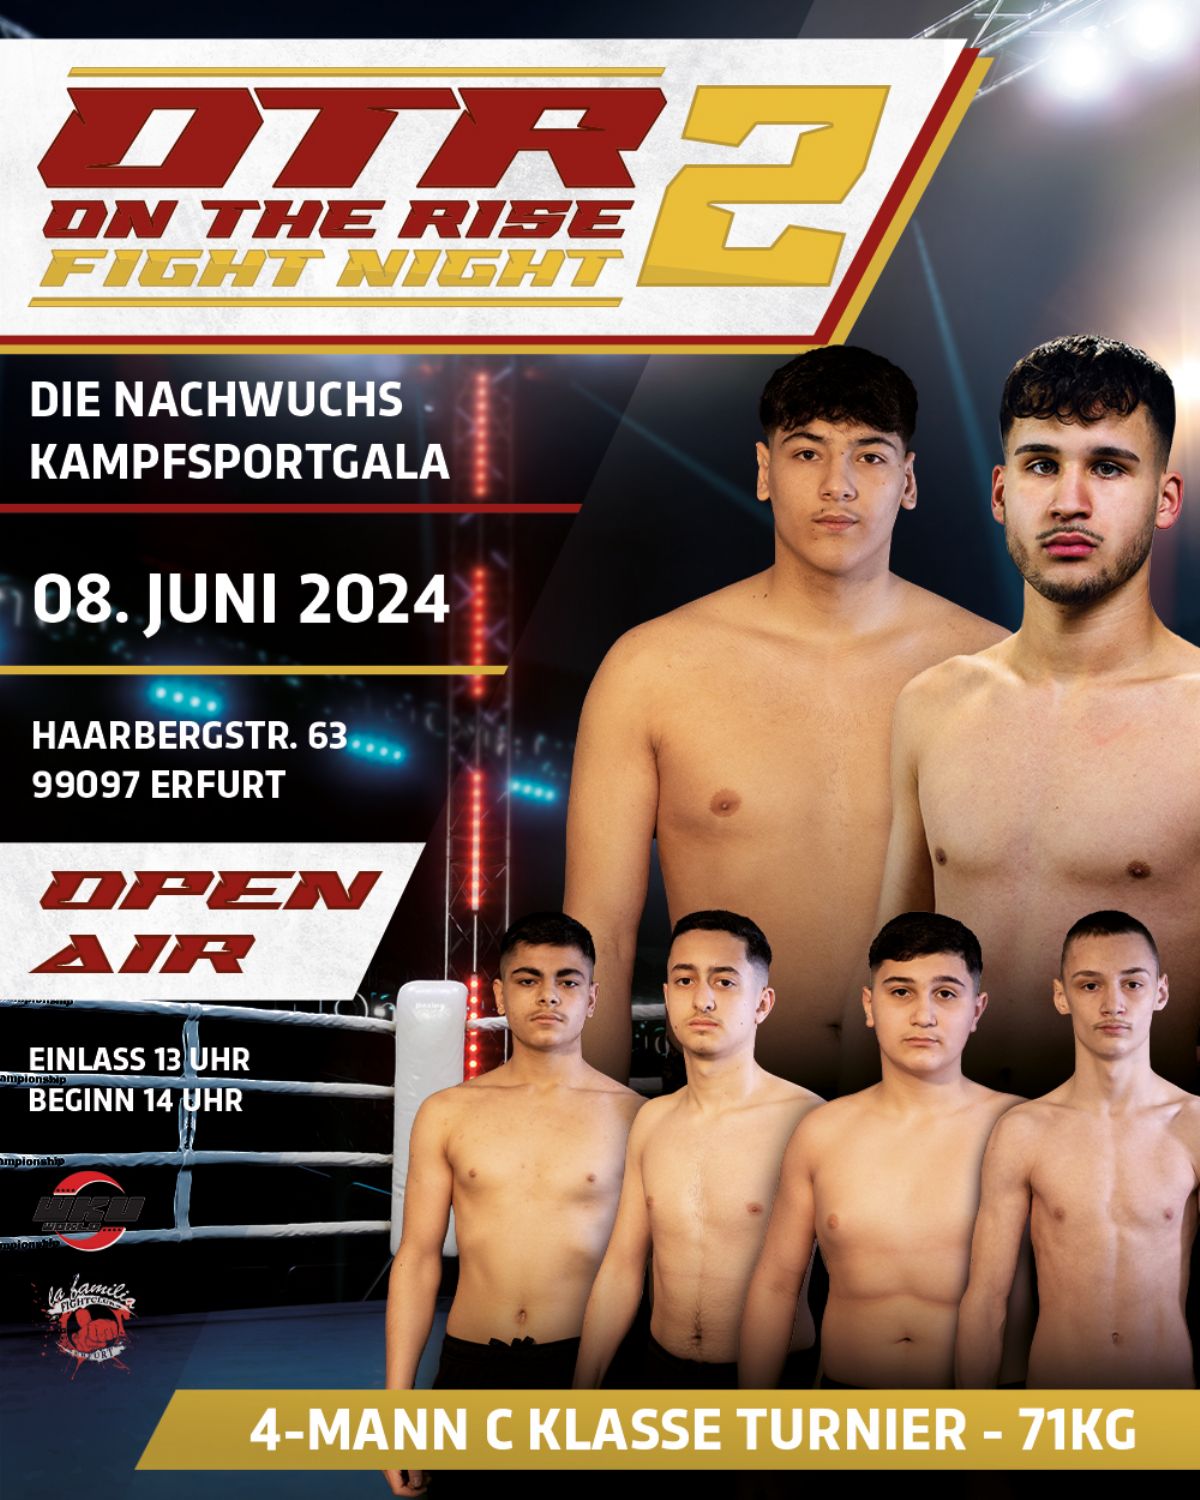 On the Rise Fight Night 2